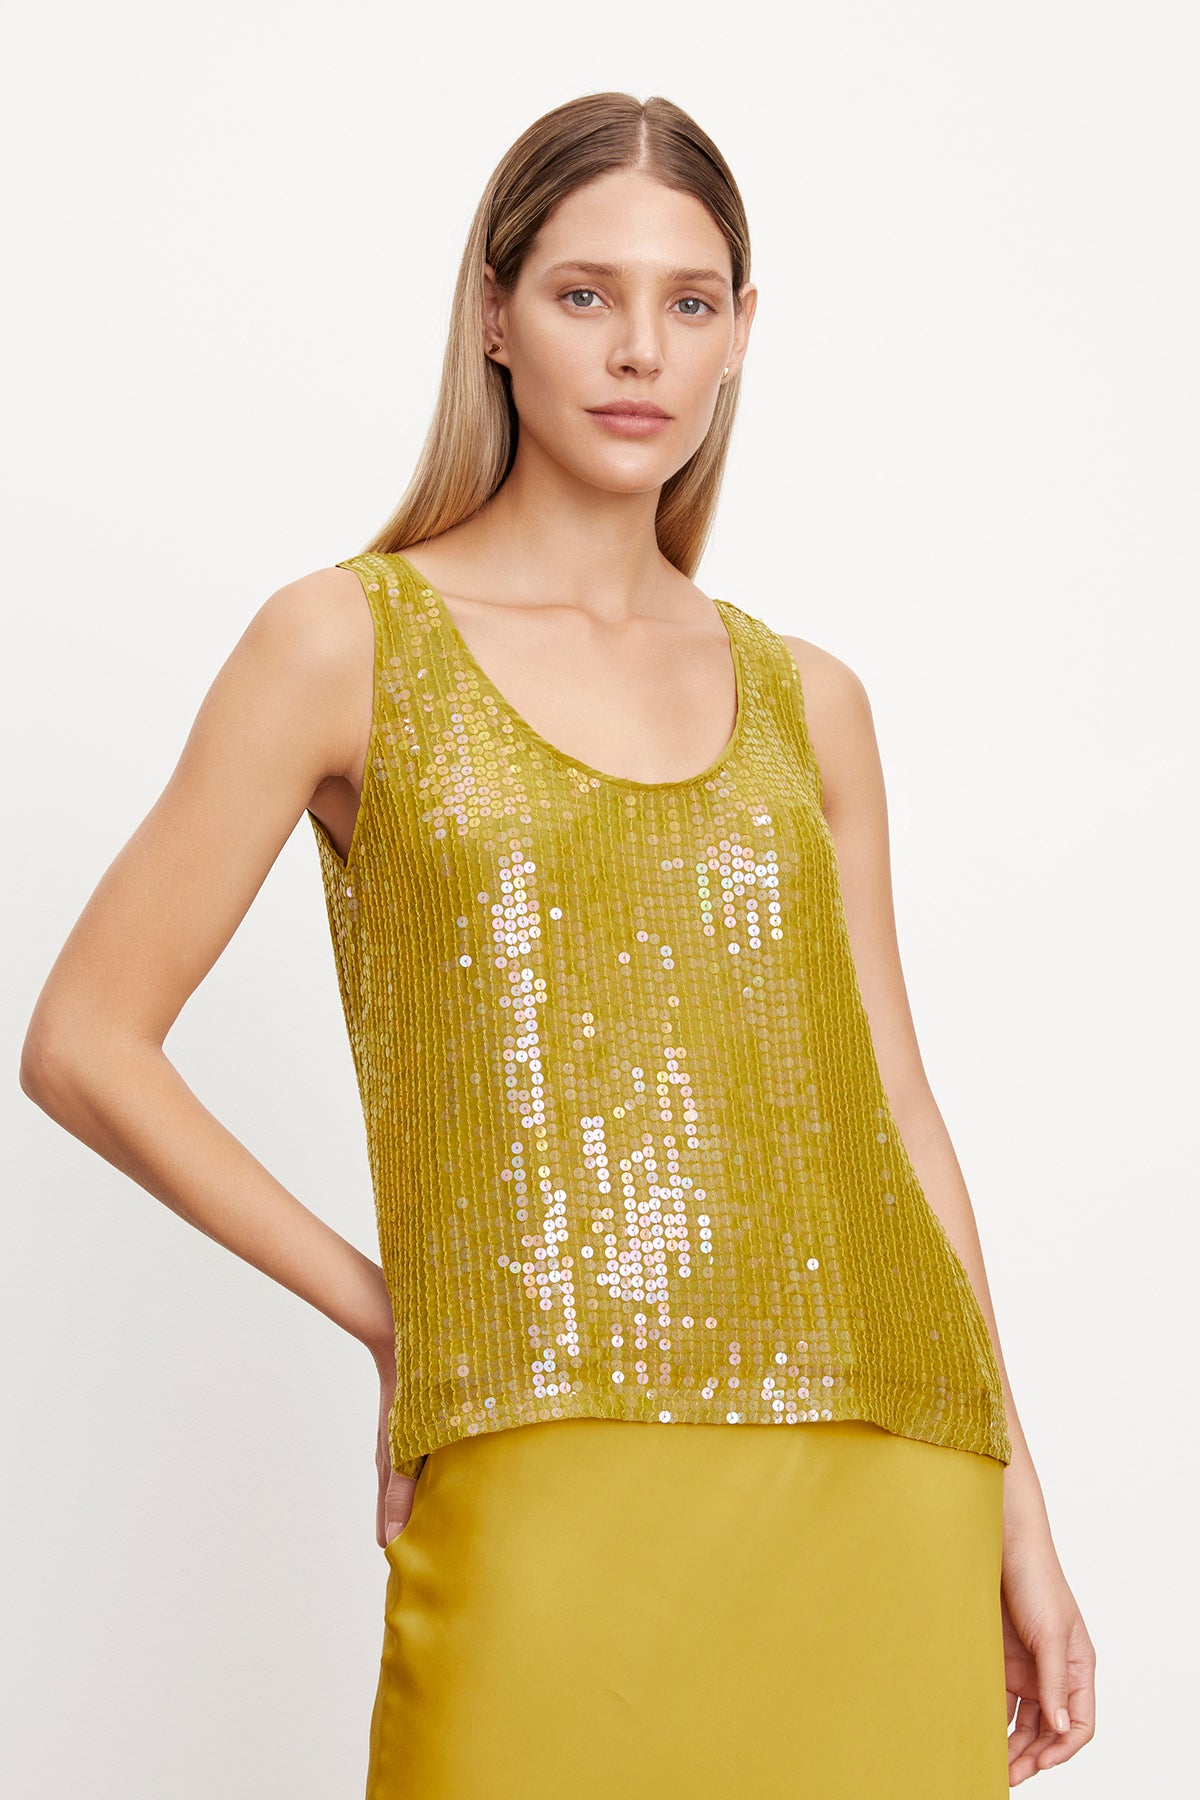   The model is wearing a chic, yellow BEHATI SEQUIN TANK TOP with a-line silhouette from Velvet by Graham & Spencer. 